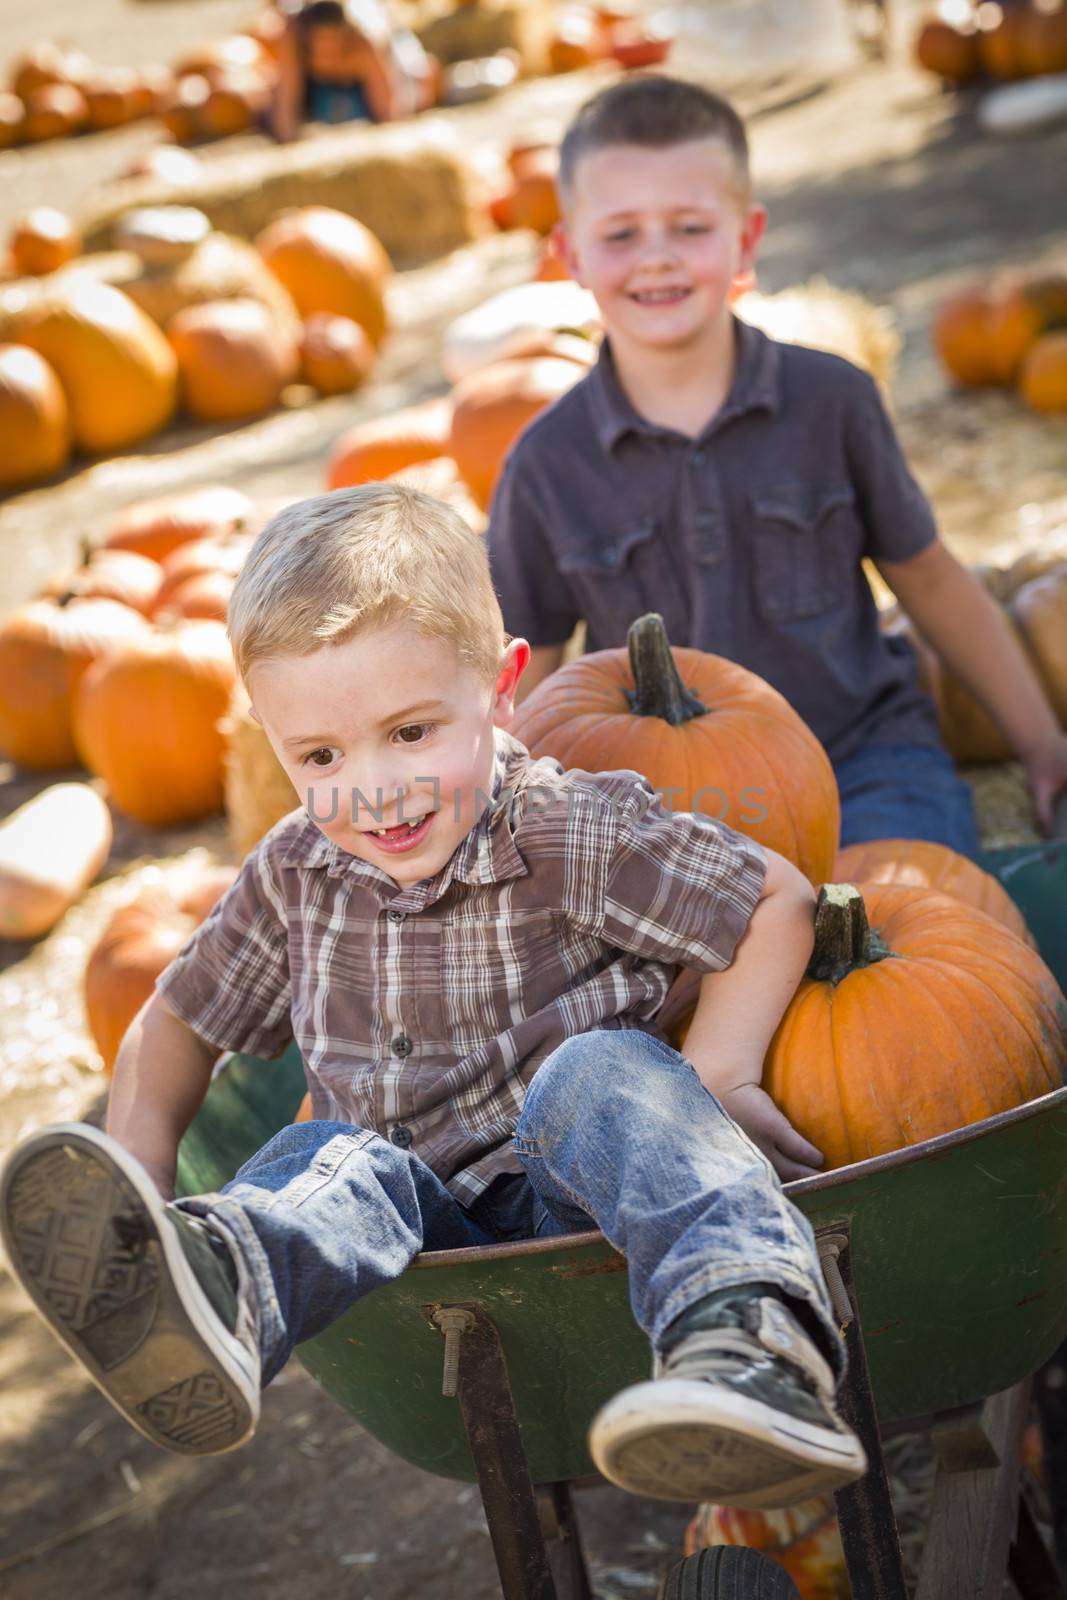 Two Little Boys Playing in Wheelbarrow at the Pumpkin Patch
 by Feverpitched